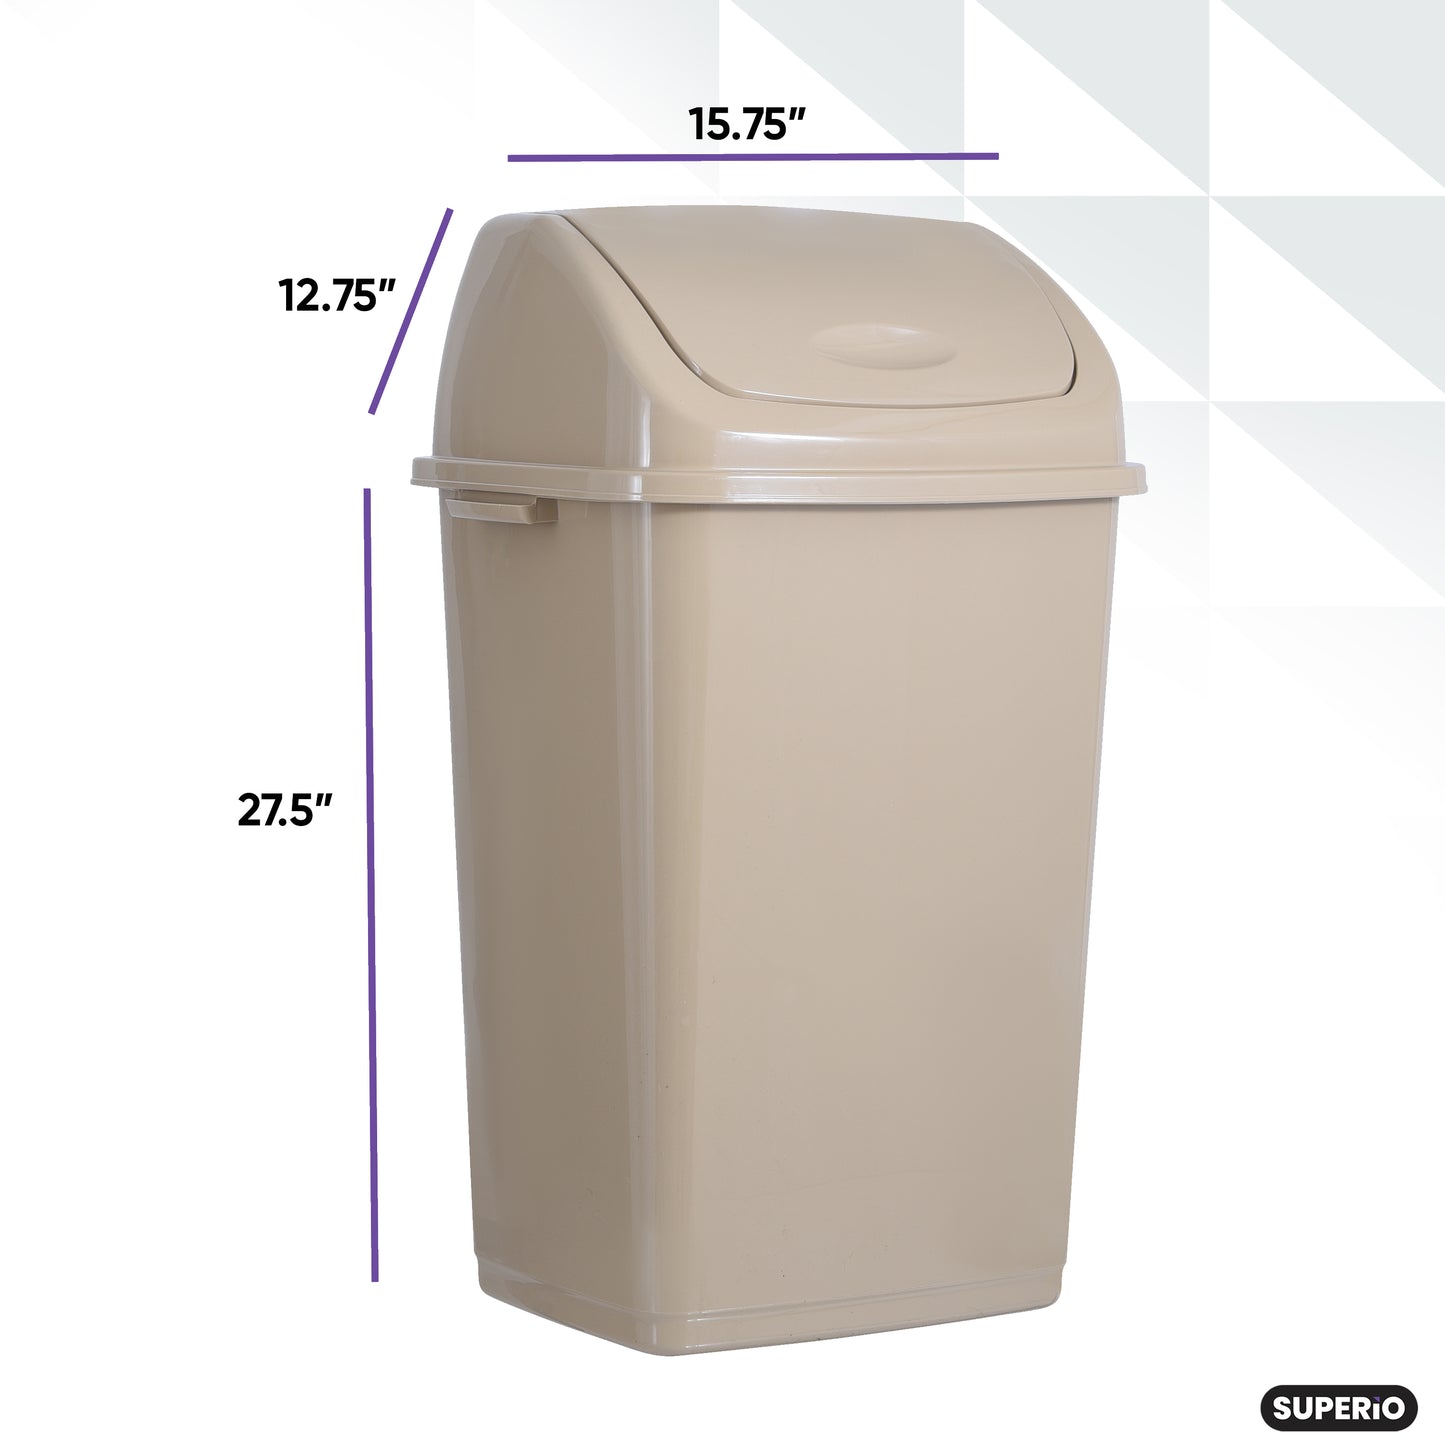 Large Swing Top Trash Can, 50 L/13 Gal - Beige